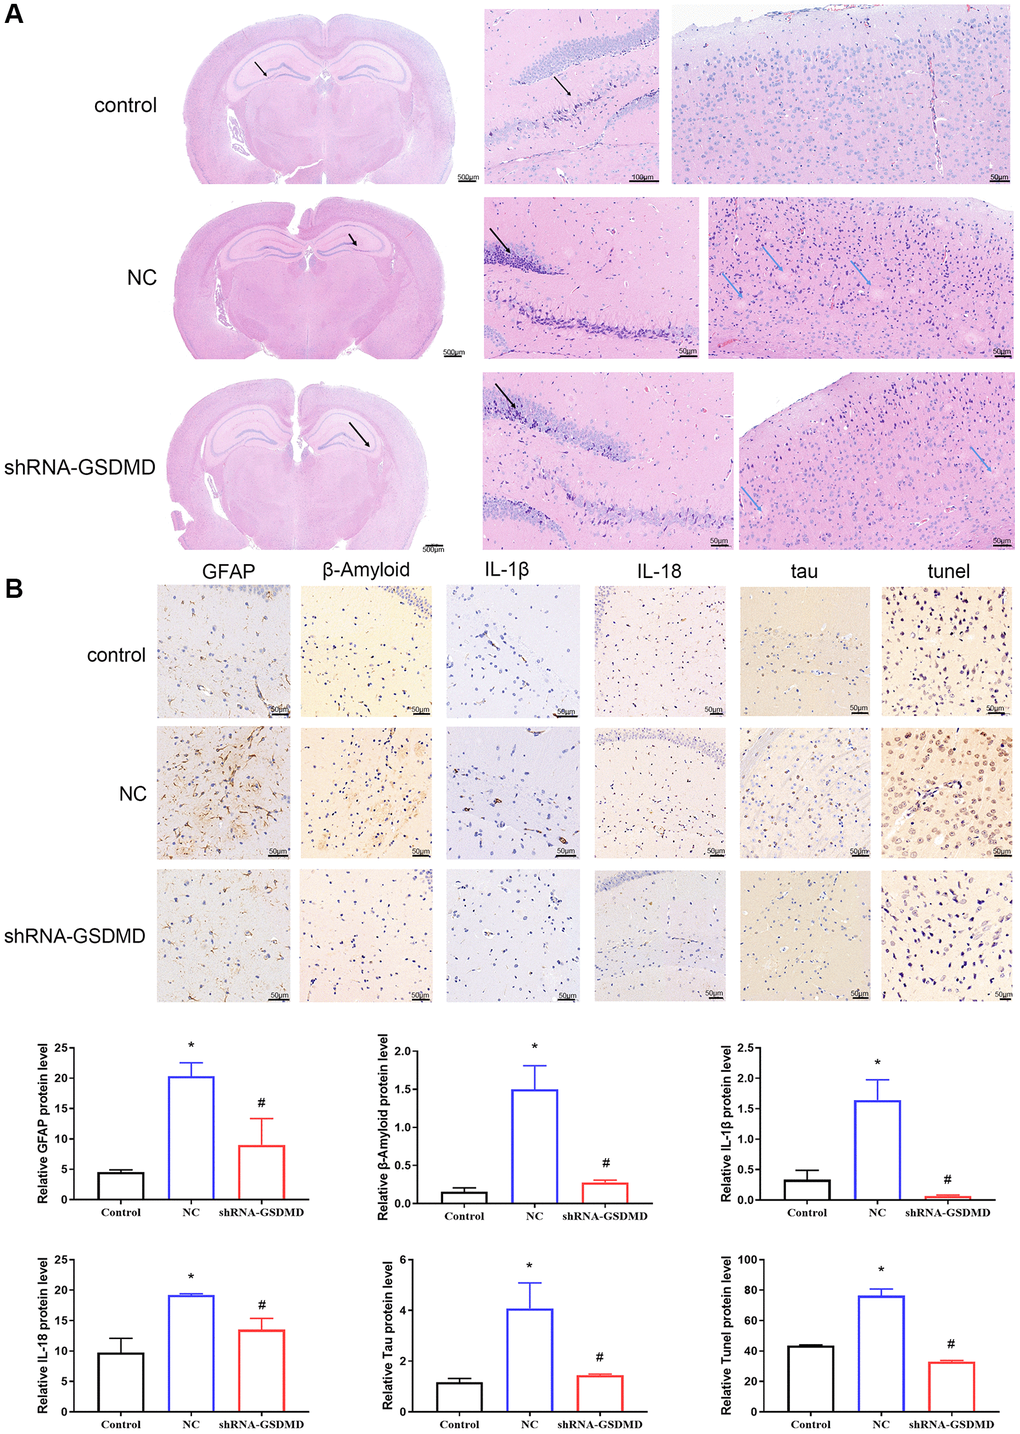 Inhibition of astrocyte pyroptosis can alleviate brain tissue lesions in APP/PS1 mice. (A) H&E staining of brain tissues. (B) Immunohistochemical analysis and protein expression of each group of GFAP, Aβ, IL-1β, IL-18, tau, and tunnel.